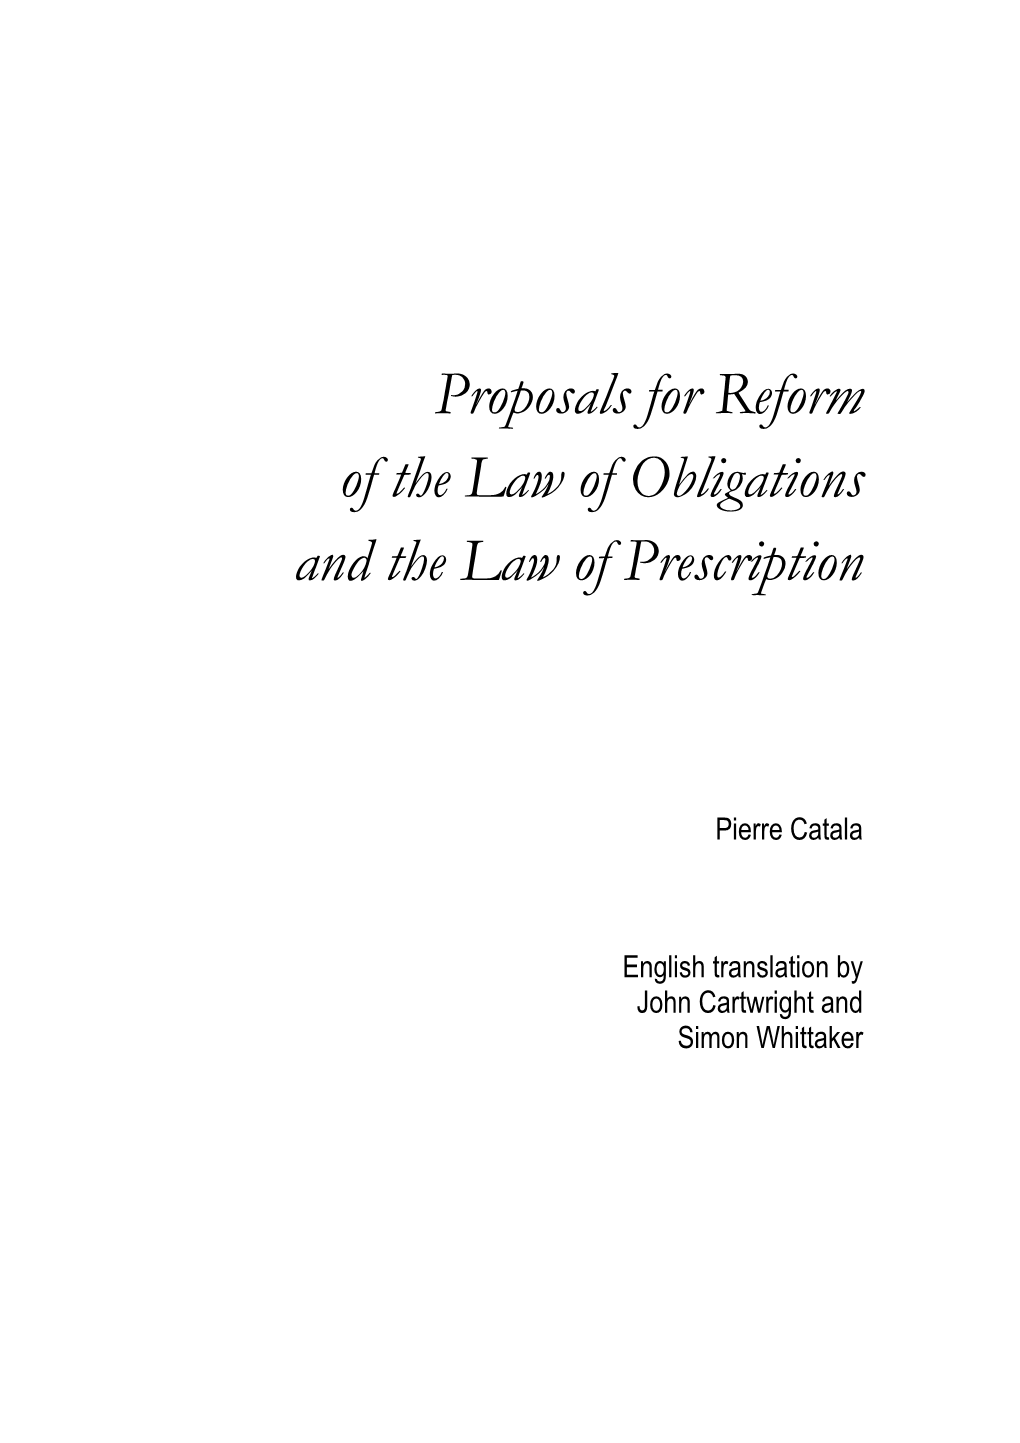 Proposals for Reform of the Law of Obligations and the Law of Prescription